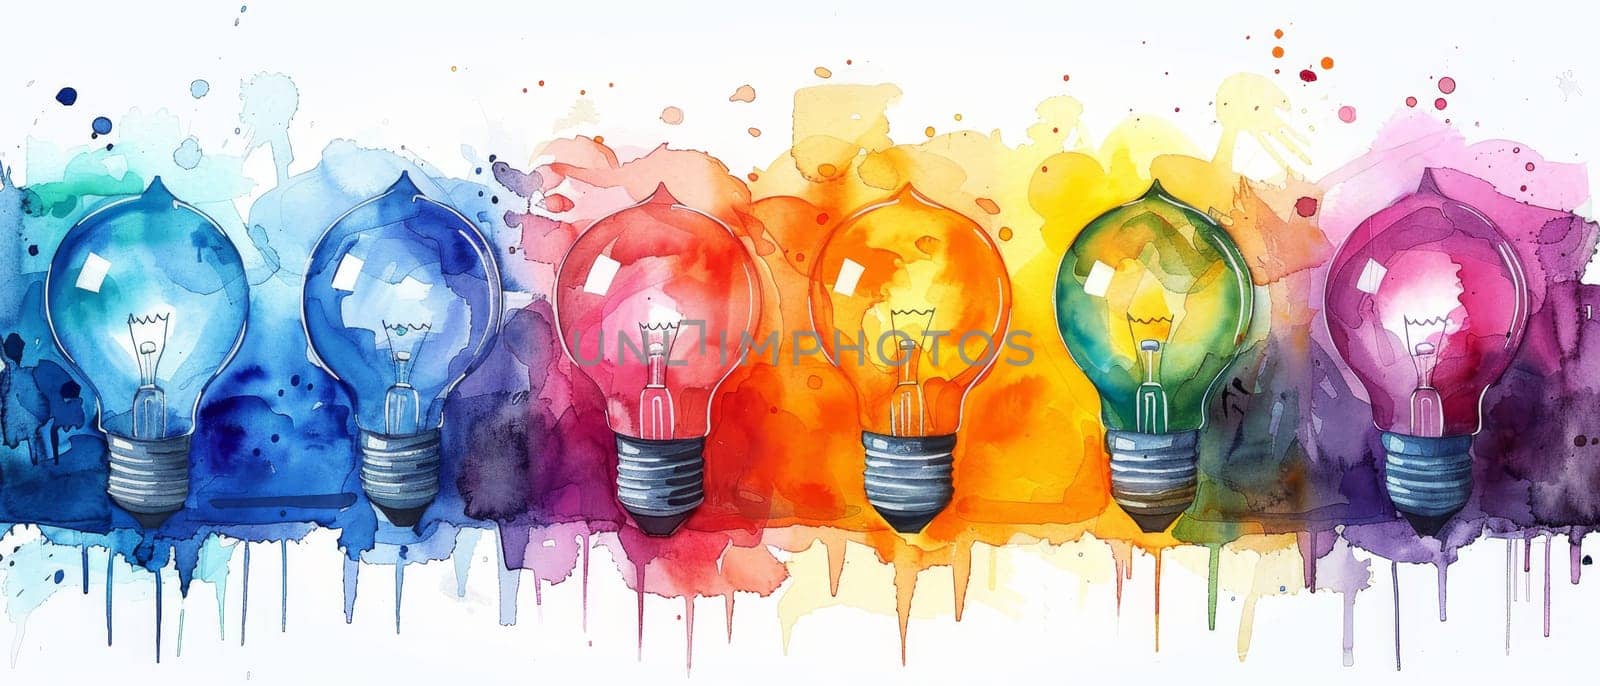 A painting of a row of colorful light bulbs by AI generated image.